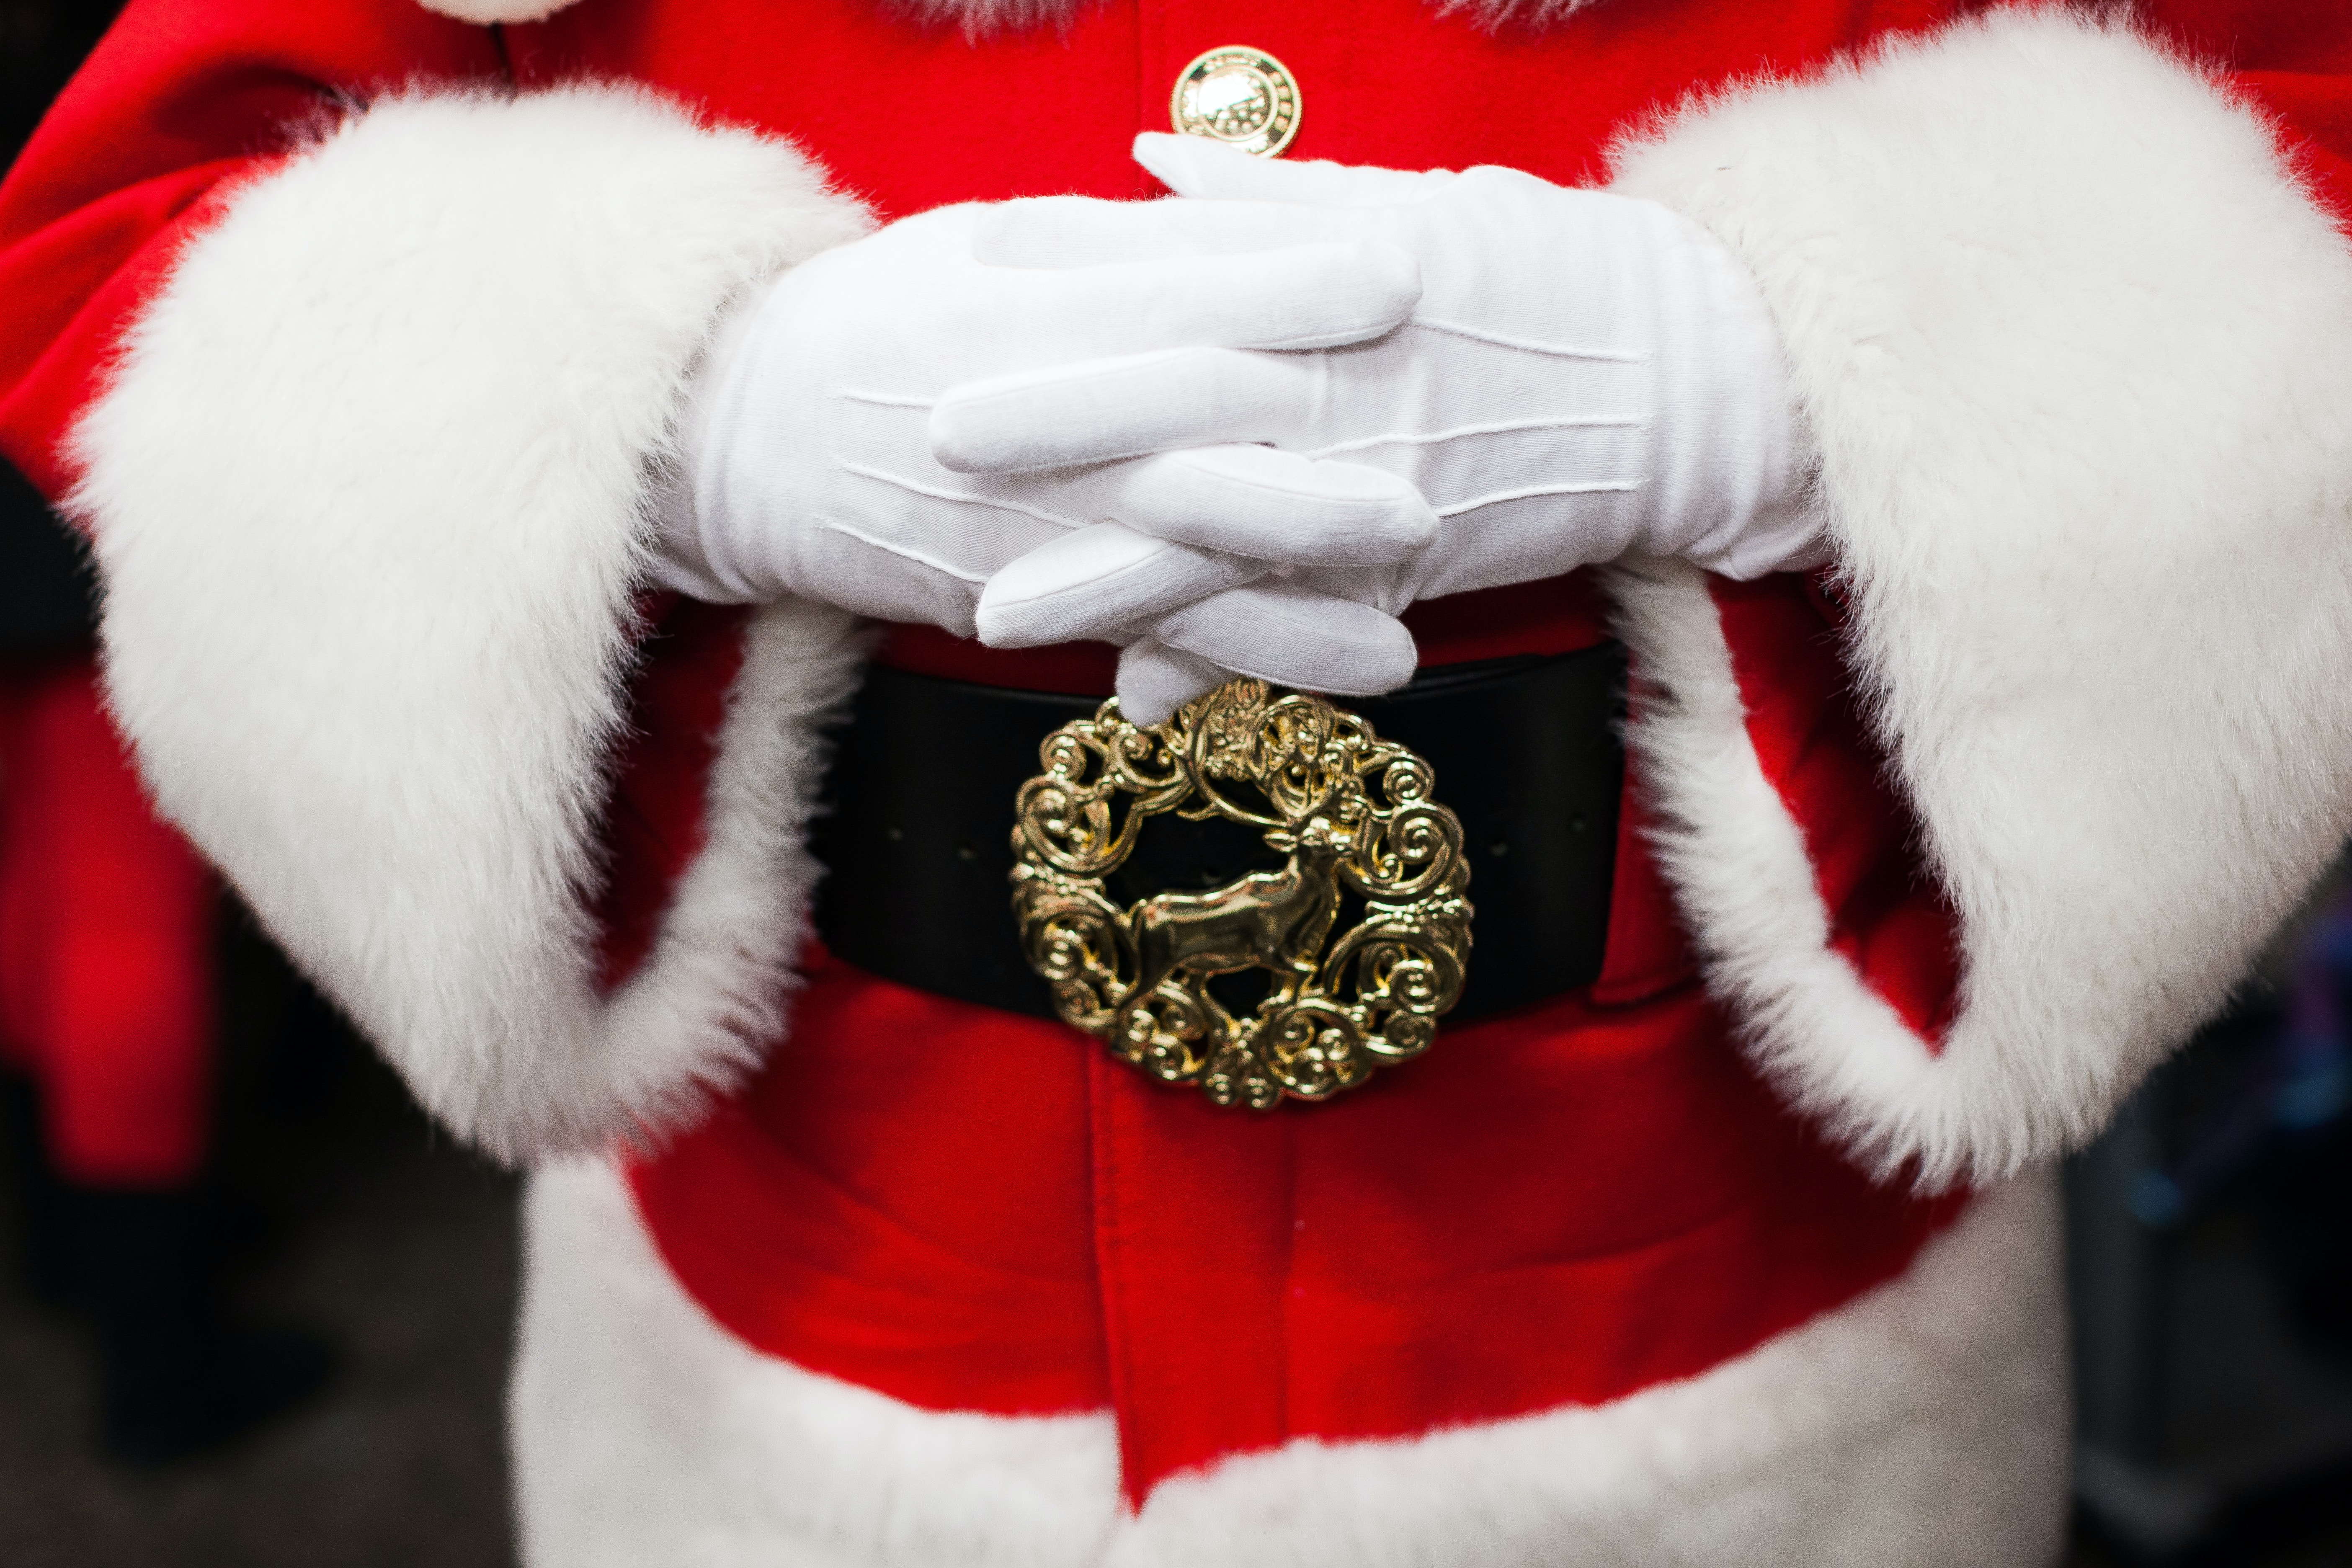 Santa in his traditional red and white suit, seen only from his chest to the bottom of his coat. His gloved hands are folded just above his big, black belt with a golden buckle featuring a reindeer inside a wreath.